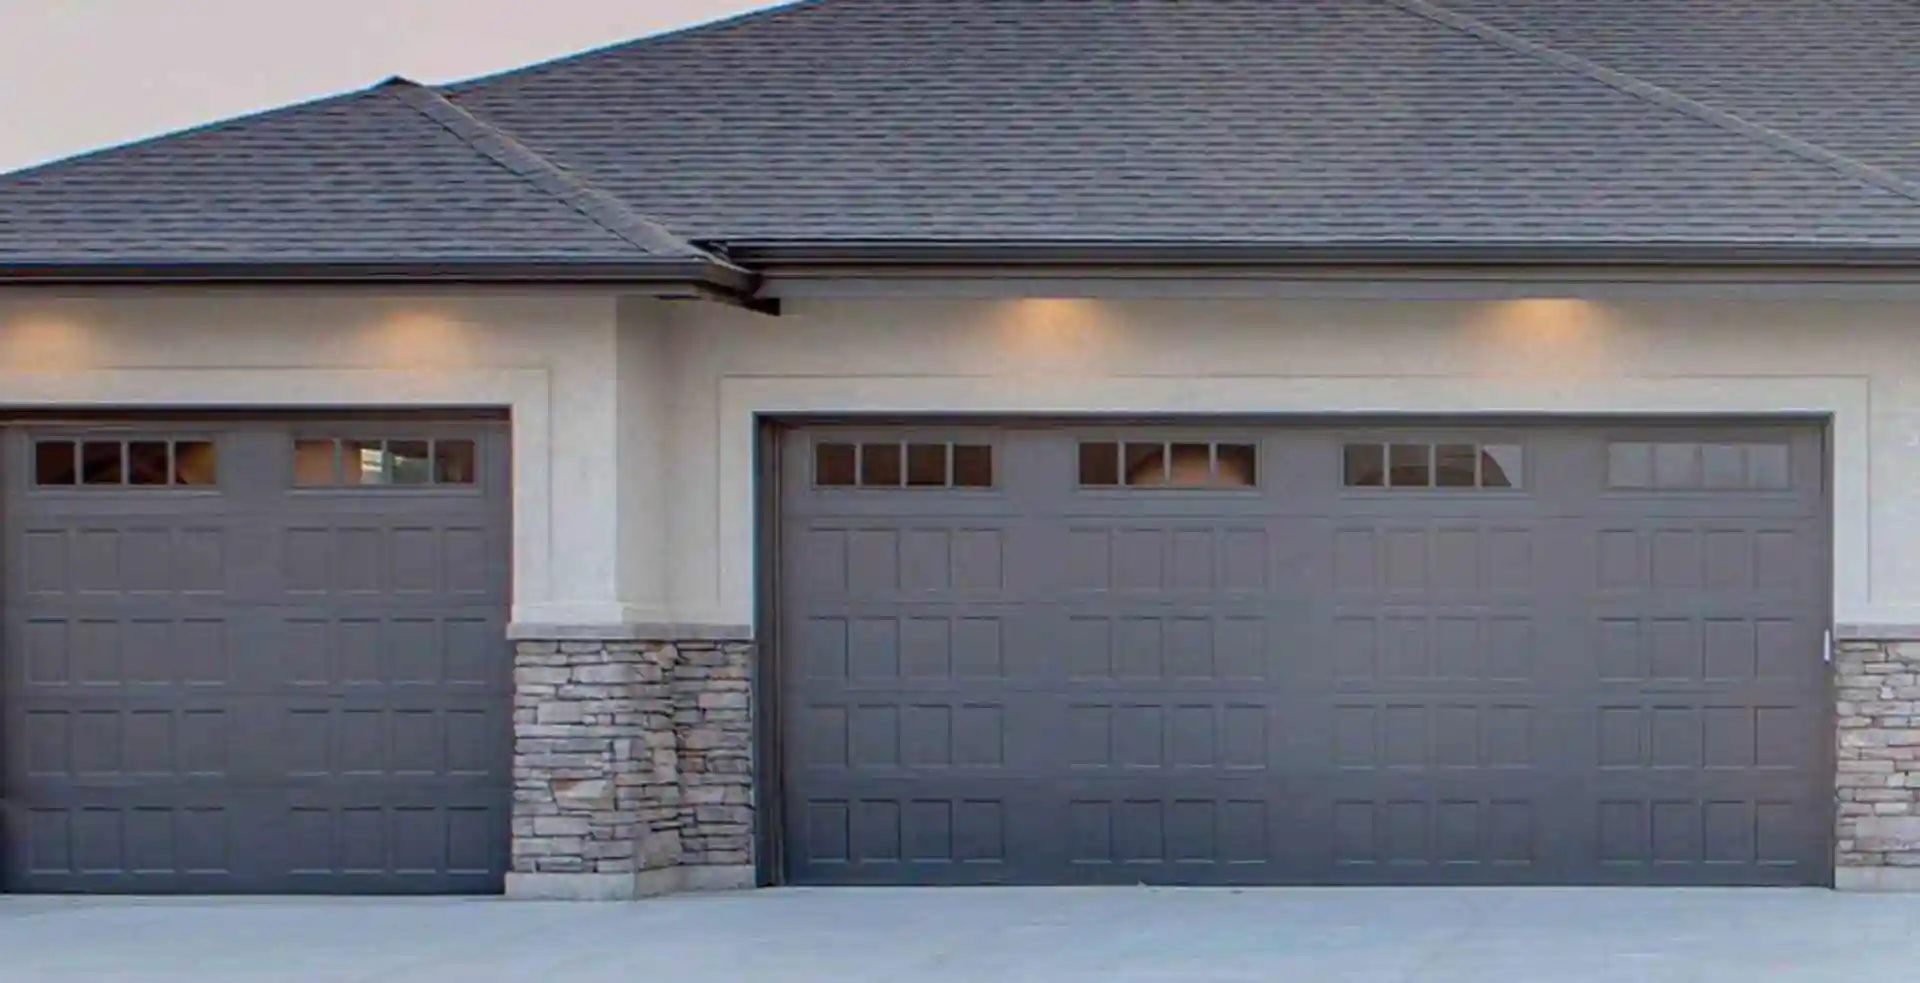 Things to Consider When Choosing a Garage Door Lubricant